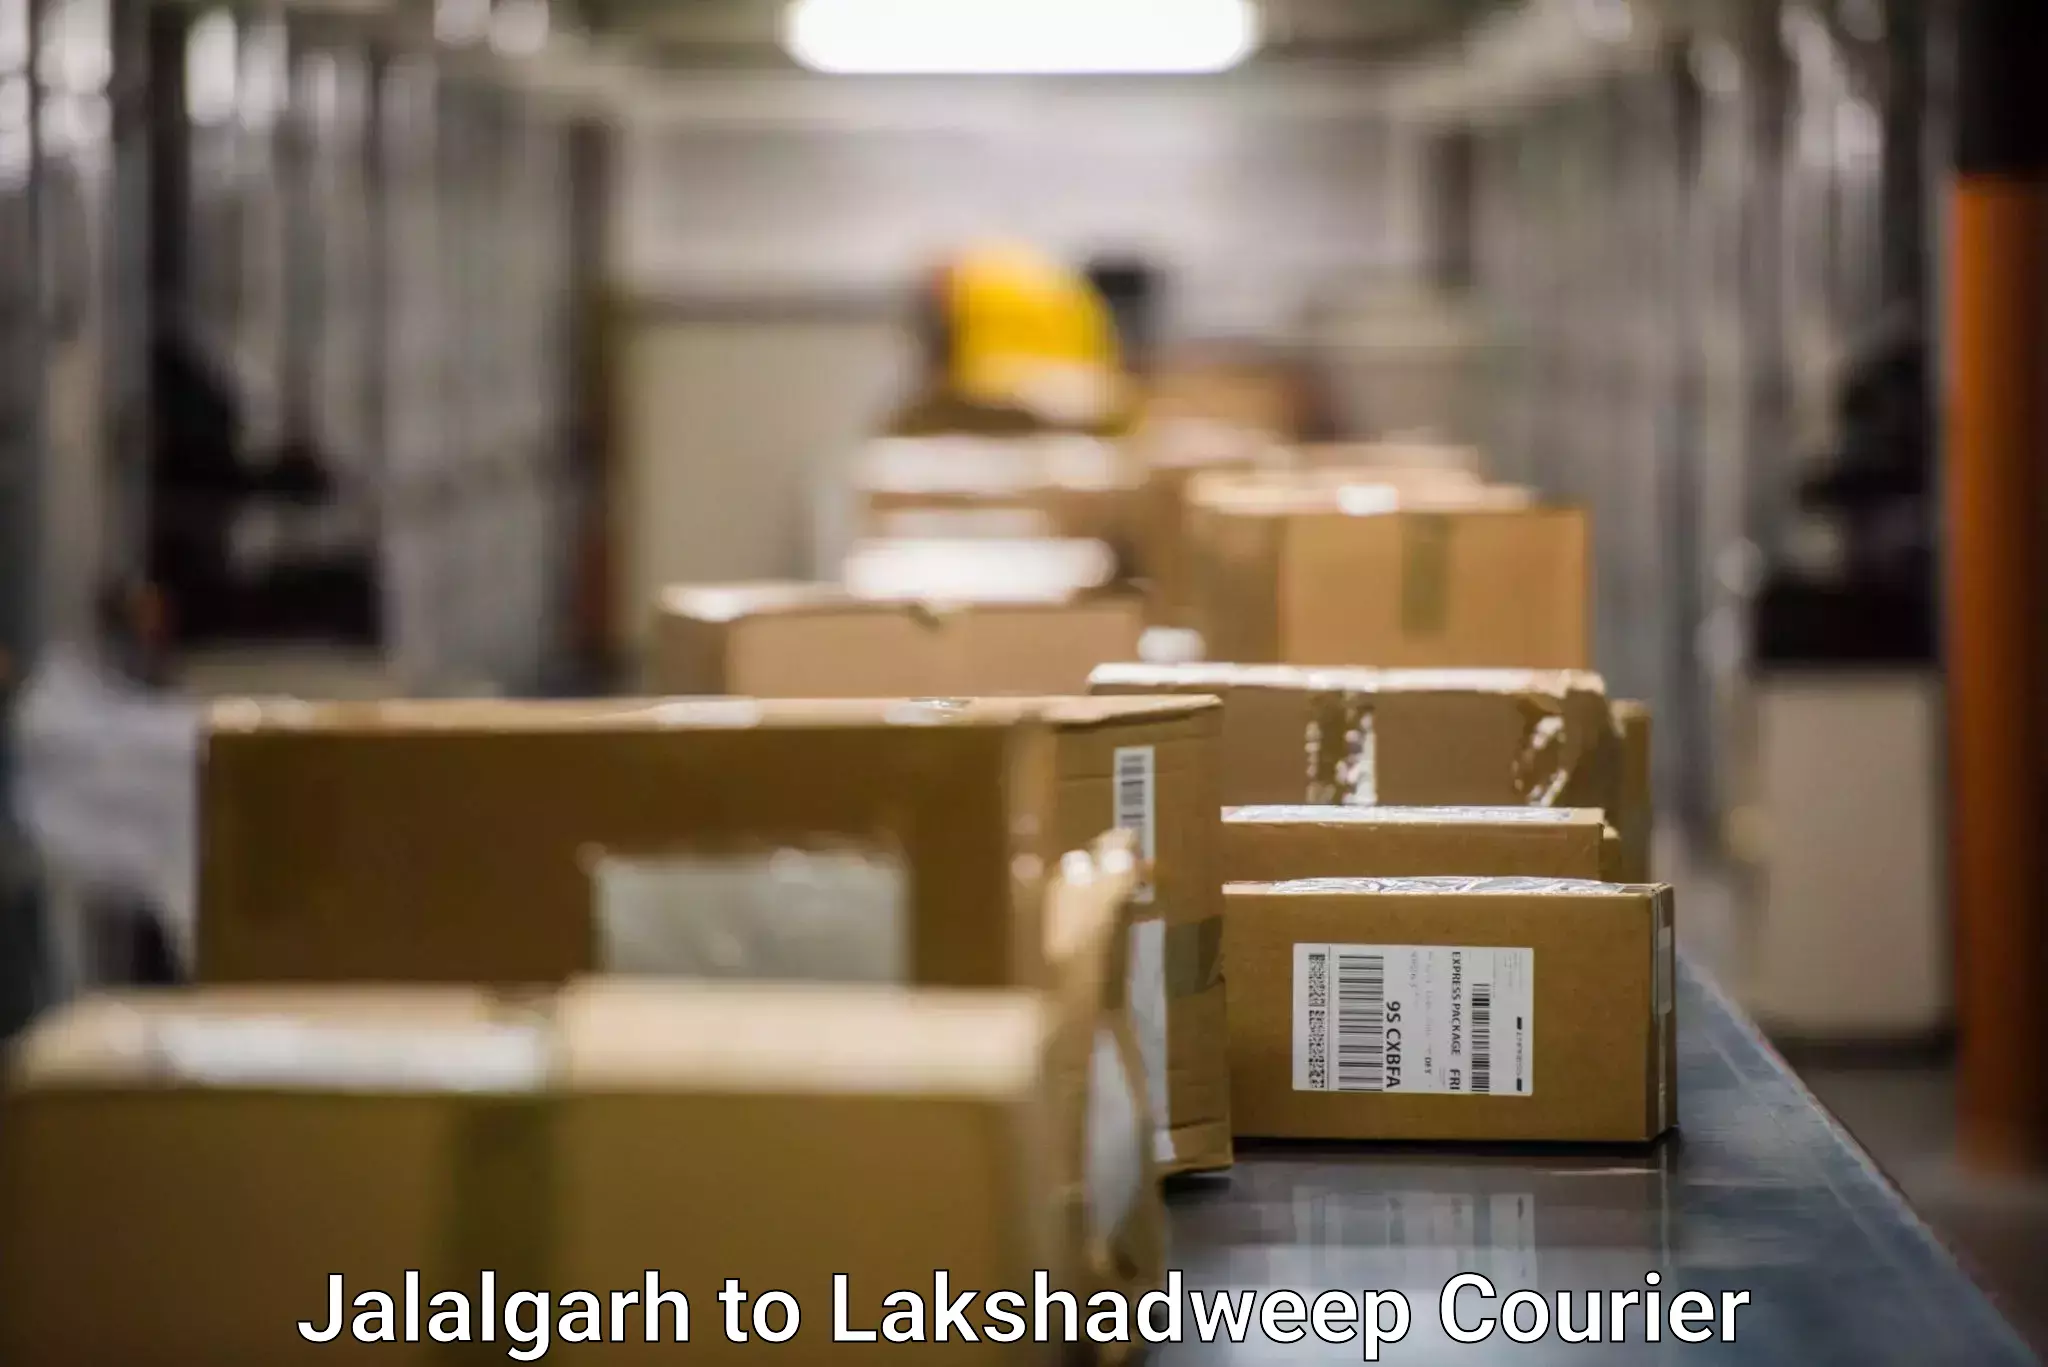 24-hour courier service Jalalgarh to Lakshadweep